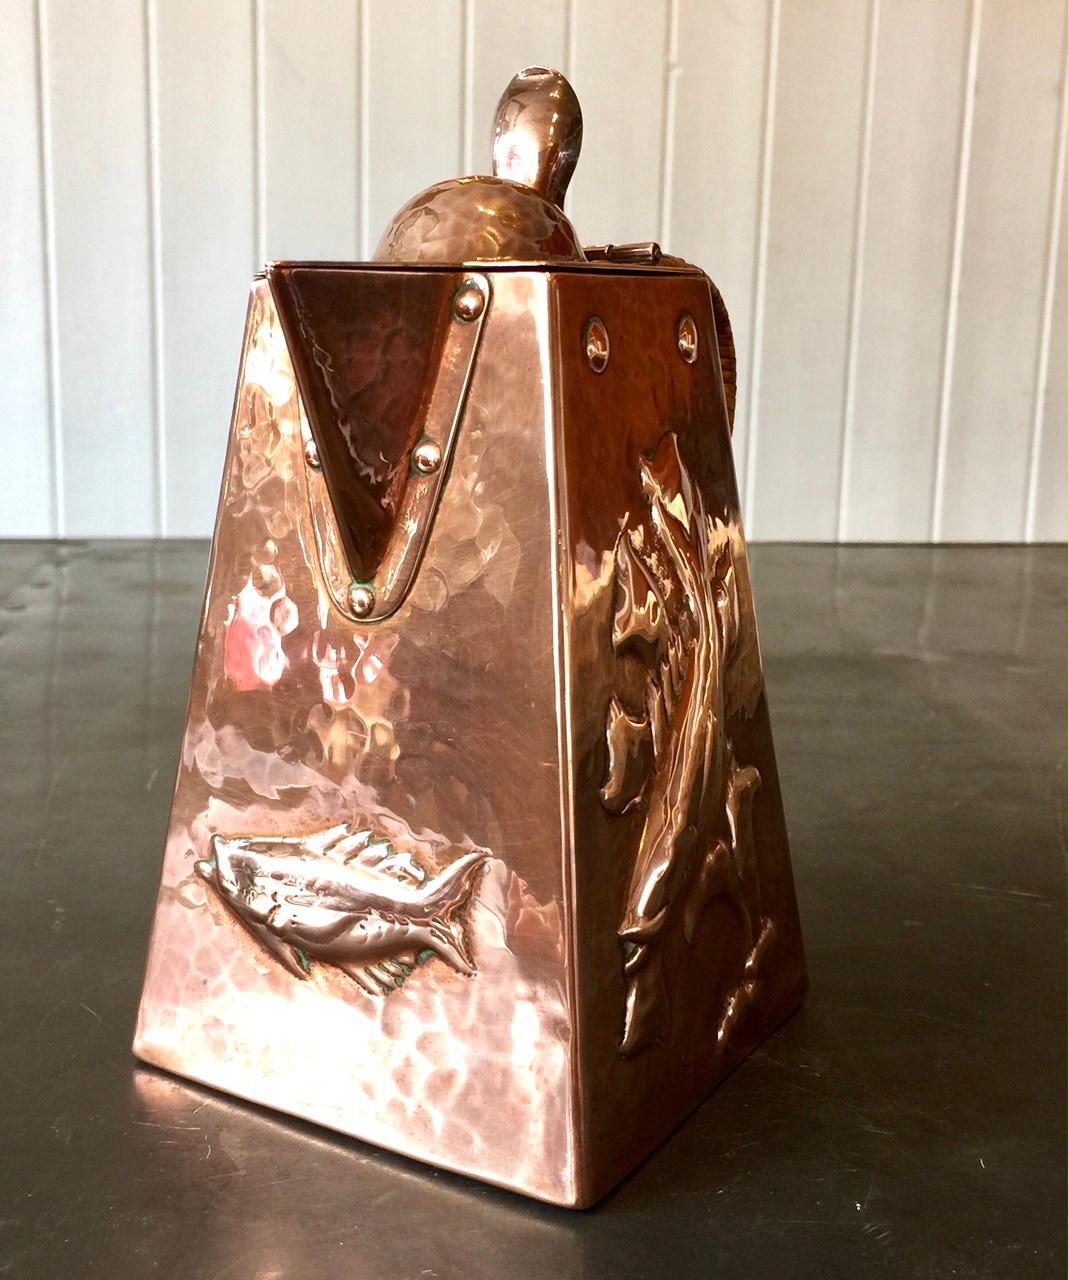 This exquisite Newlyn copper water jug is typical of the work produced by various artists working in the Arts & Crafts movement in the Cornish fishing village of Newlyn in the late 19th century to early 20th century. Of outward tapered form with